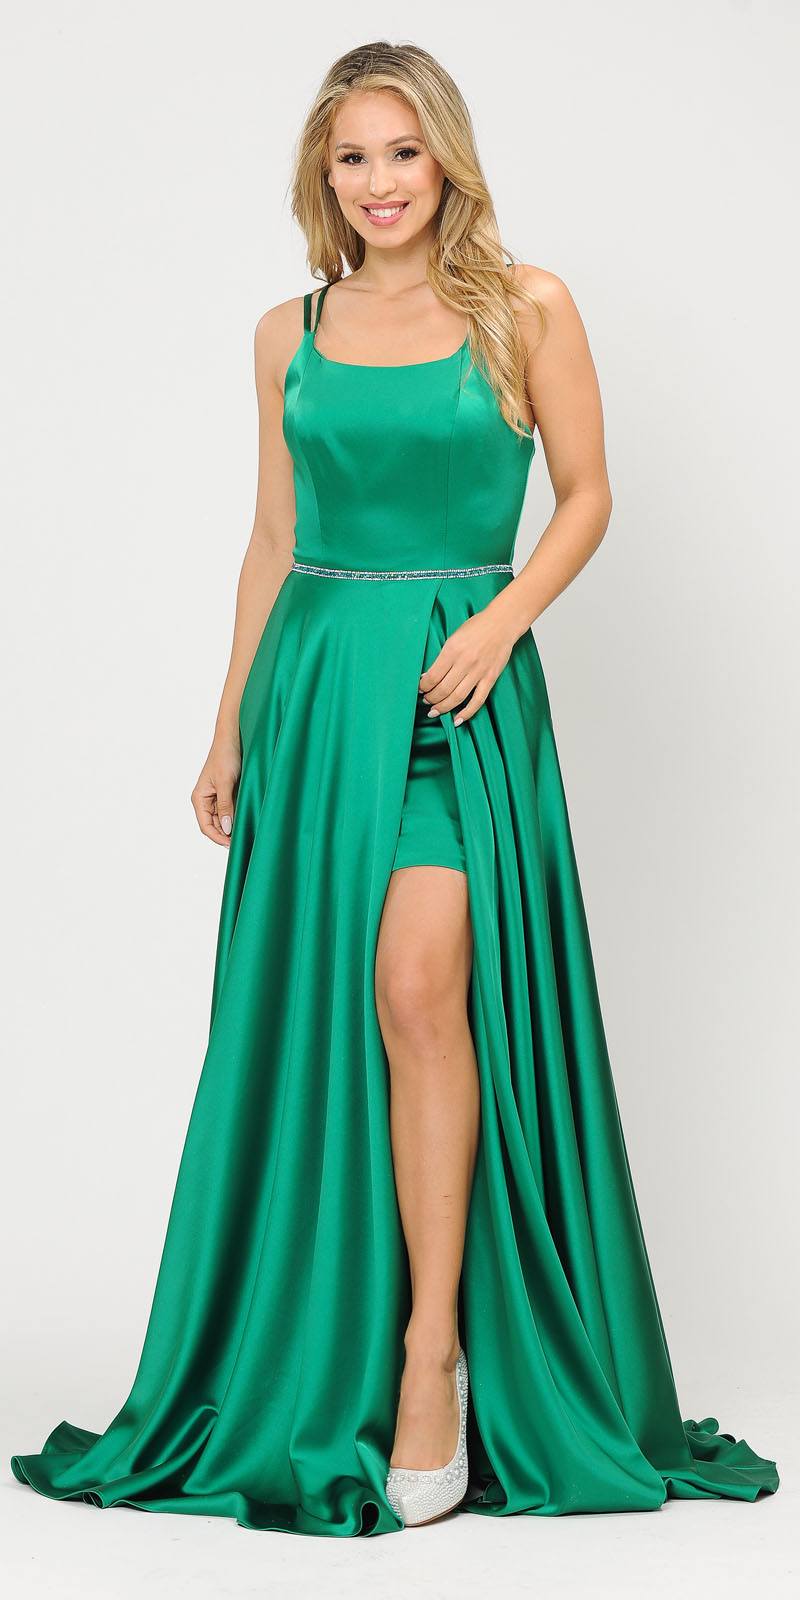 Long Romper Prom Dress with Cut-Out Lace-Up Back Kelly Green